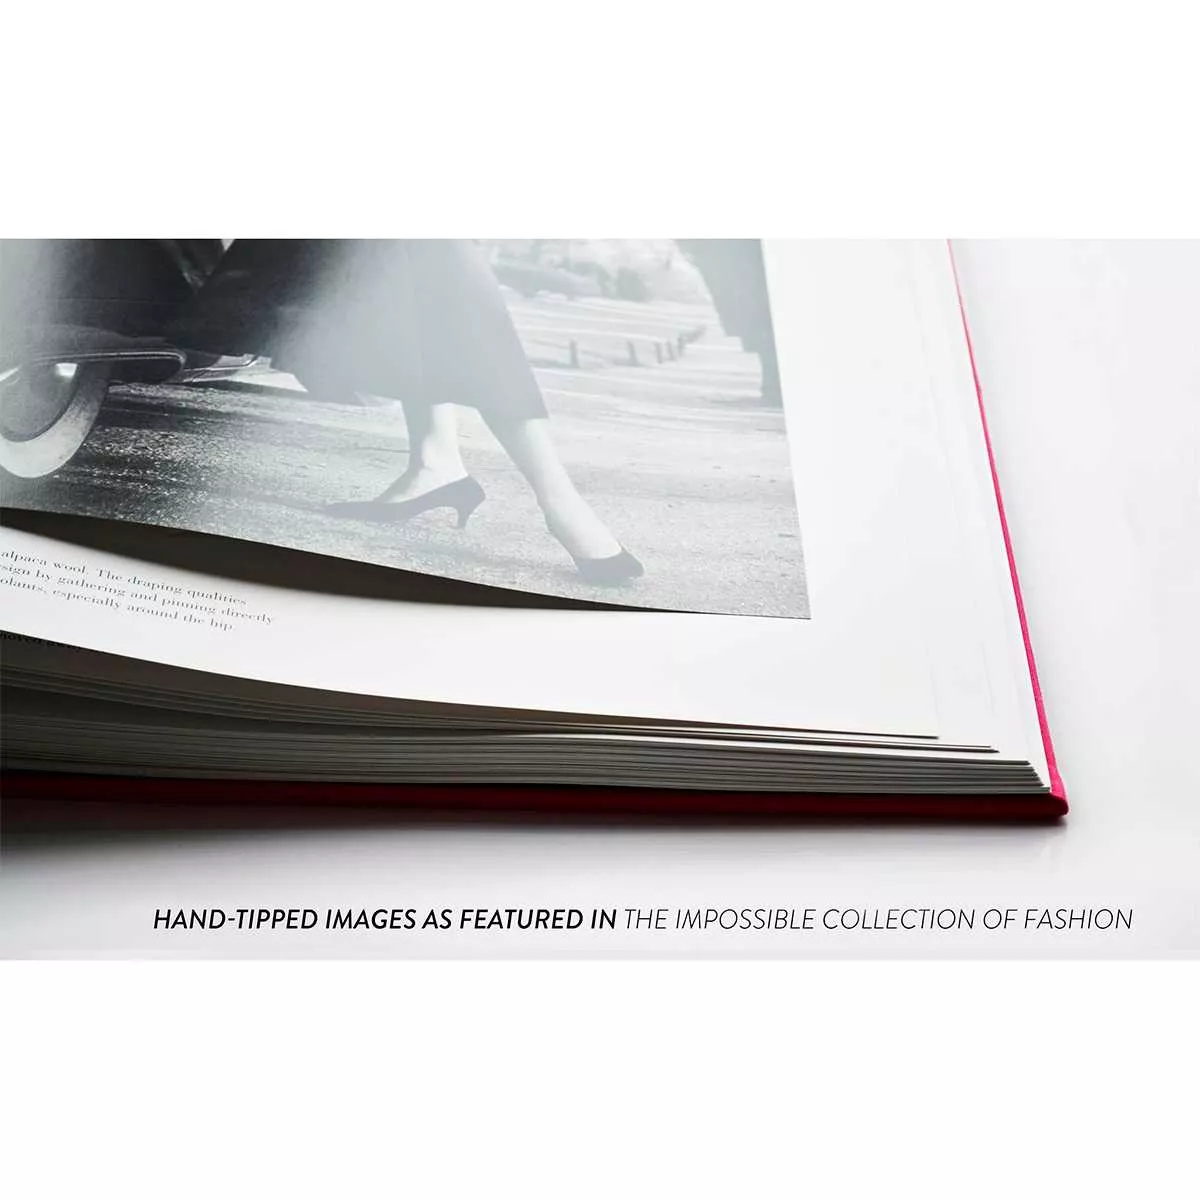 Книга "The Impossible Collection of Fashion" Assouline Collection (9781614280163) - Фото nav 6